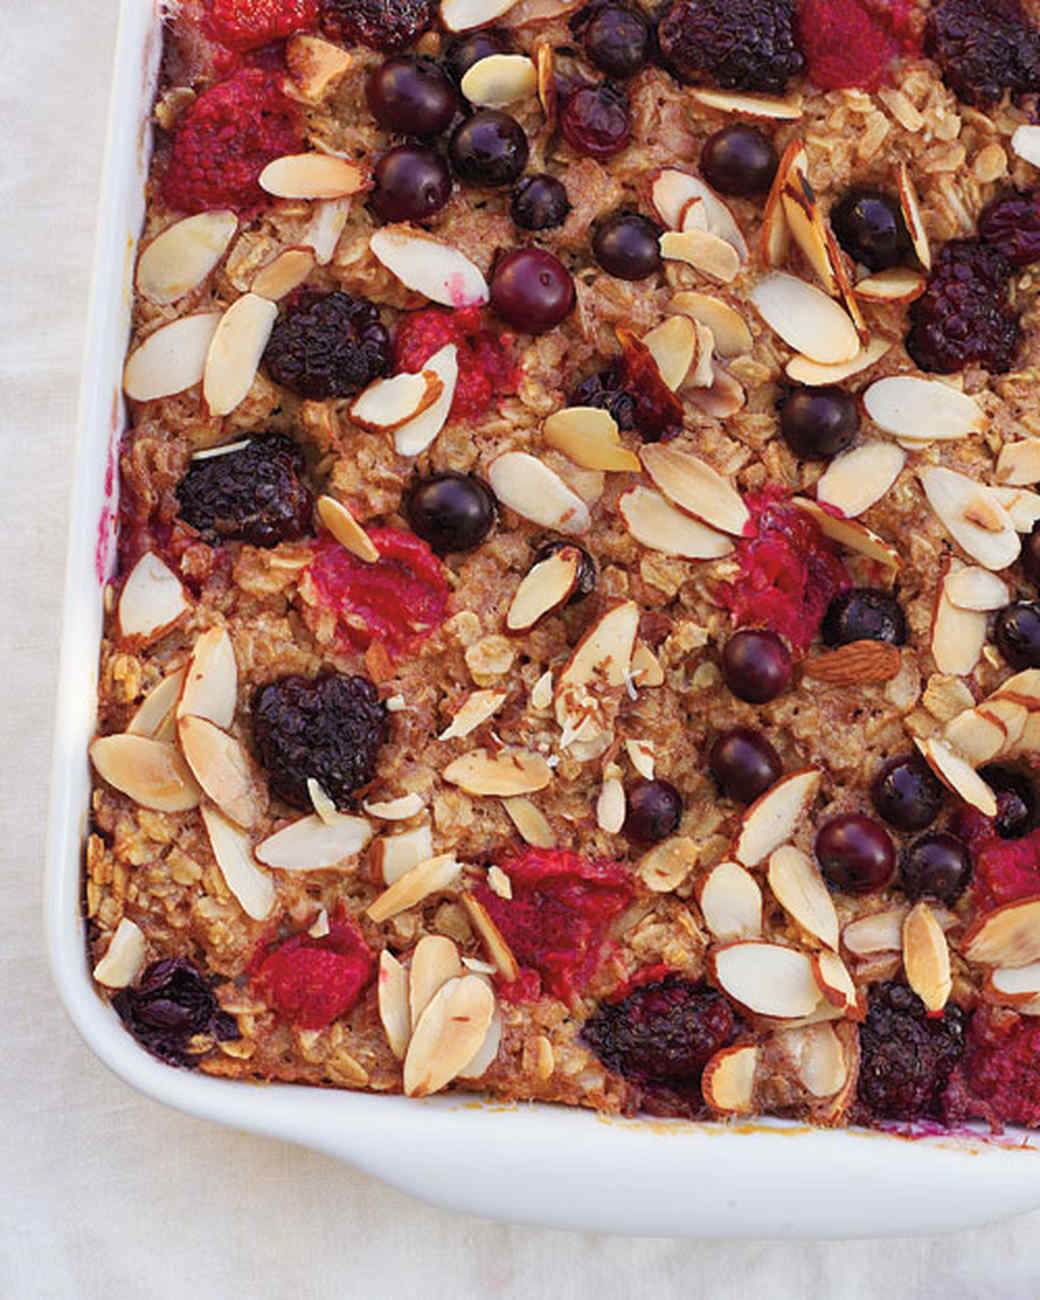 Healthy Oatmeal Recipes for Breakfast and Other Meals | Martha Stewart